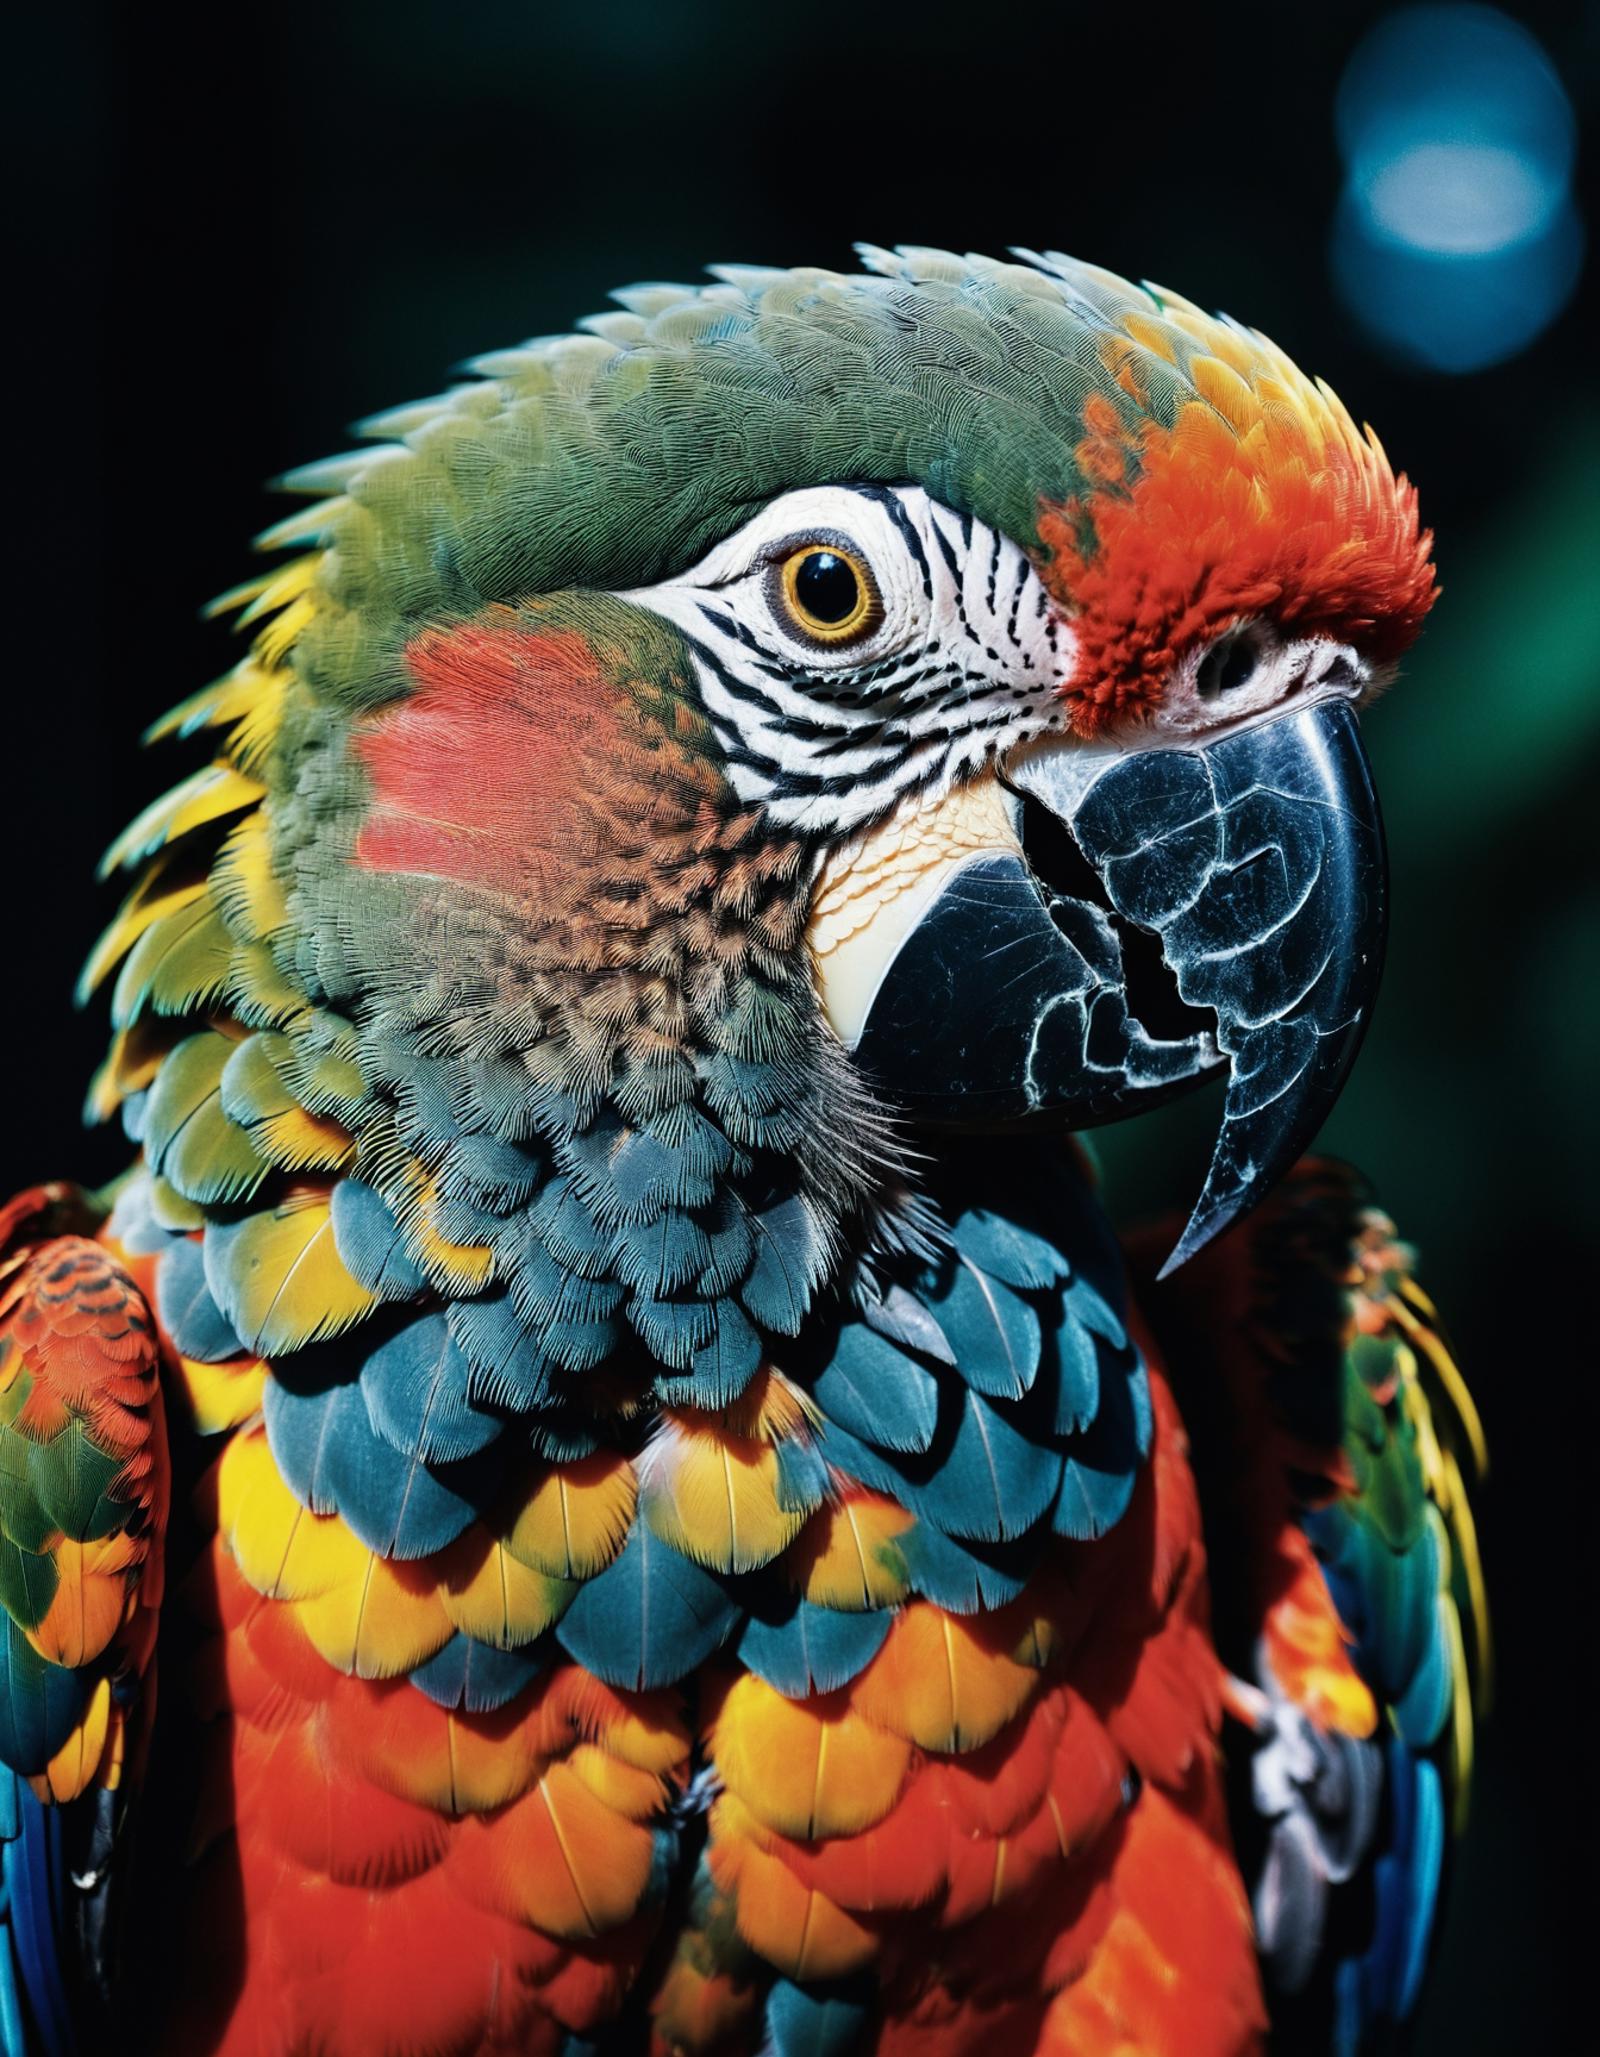 The head of a colorful bird with a yellow eye, a beak, and feathers.